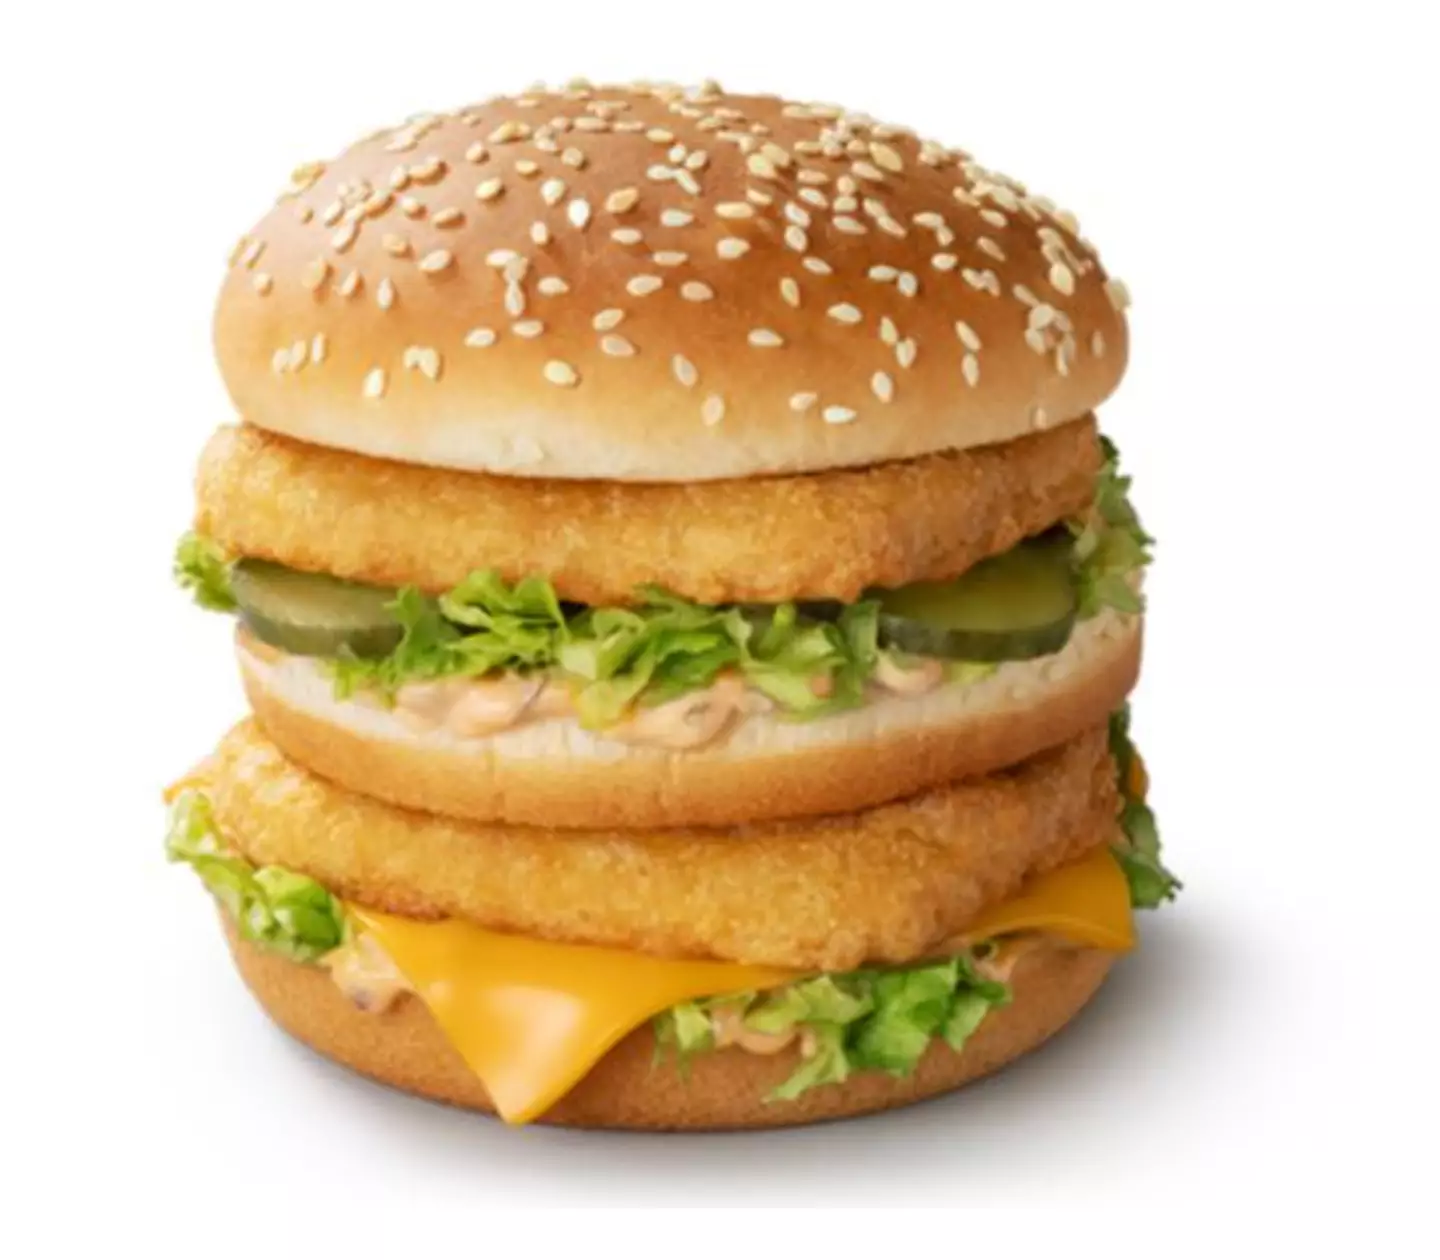 The Chicken Big Mac is also making its grand return.